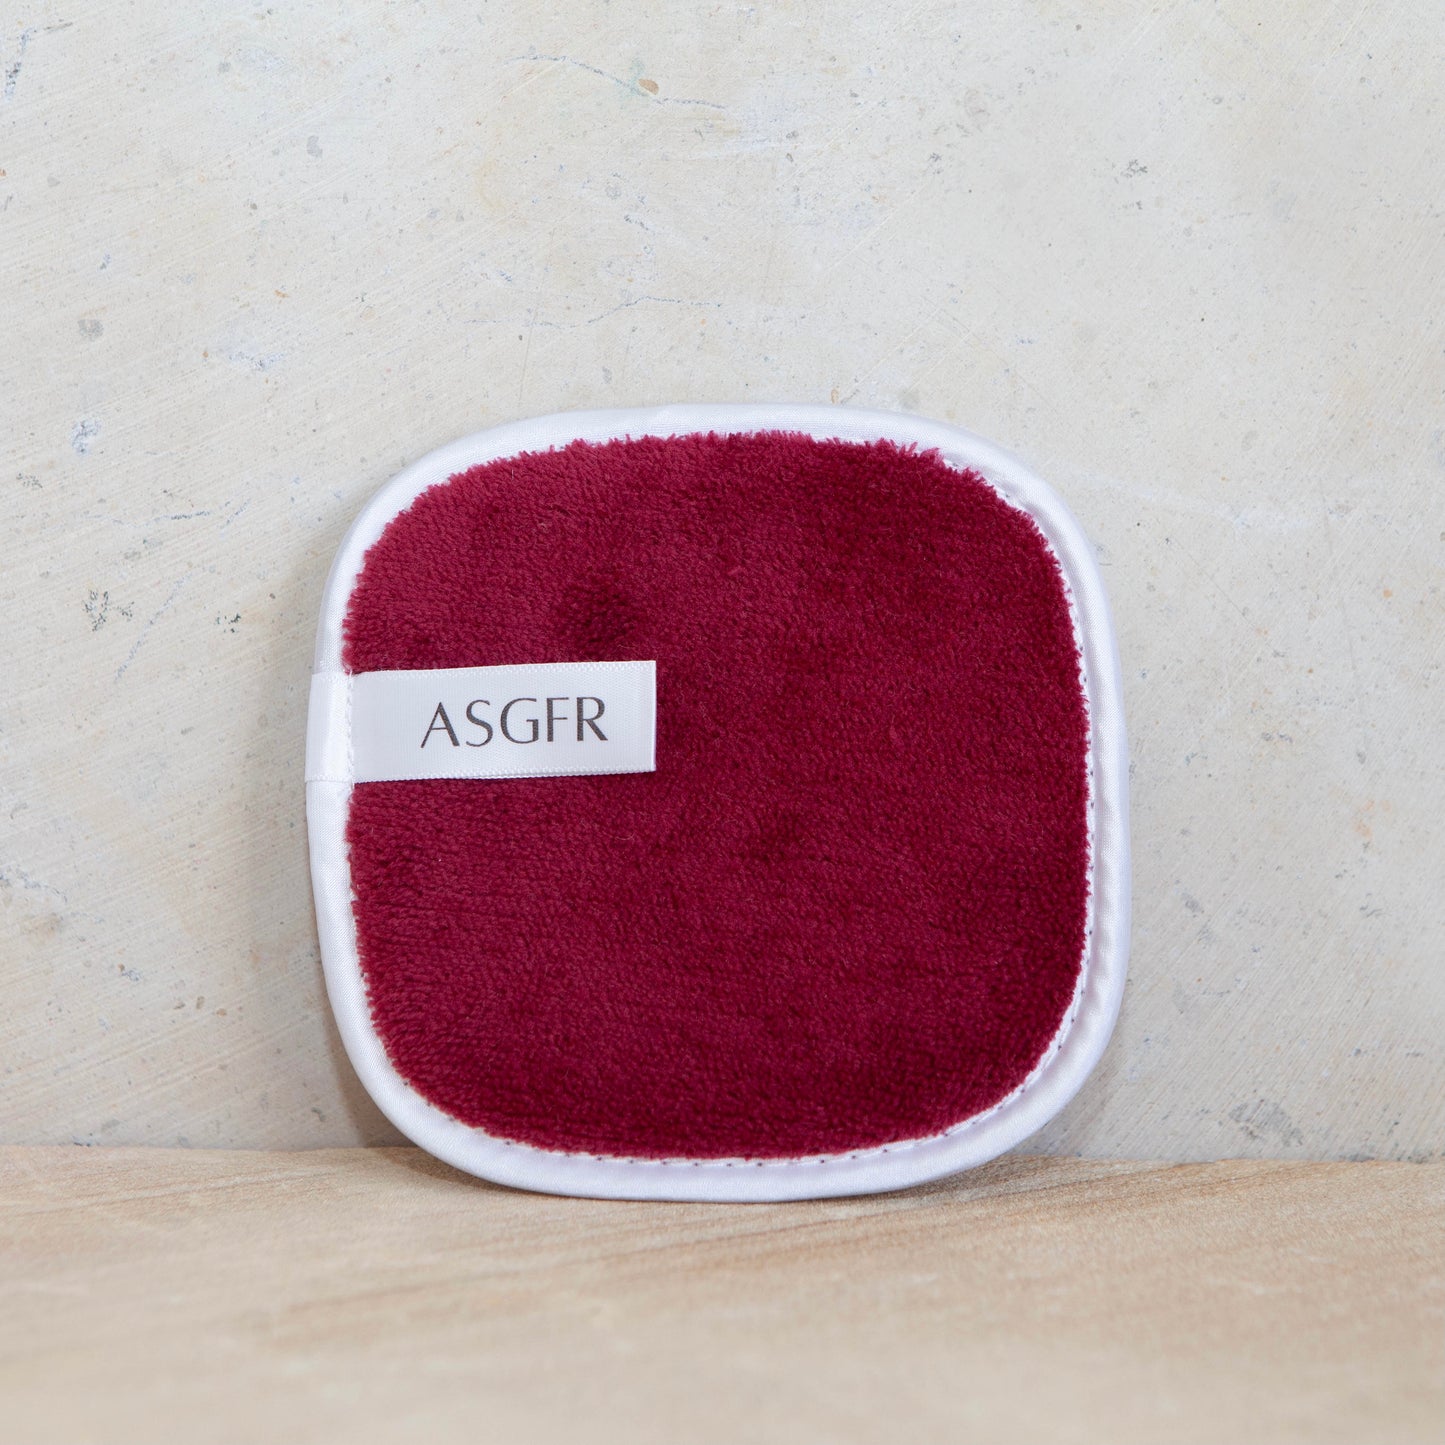 The Guide Me Exfoliant Wash Cloth Rouge 10cm